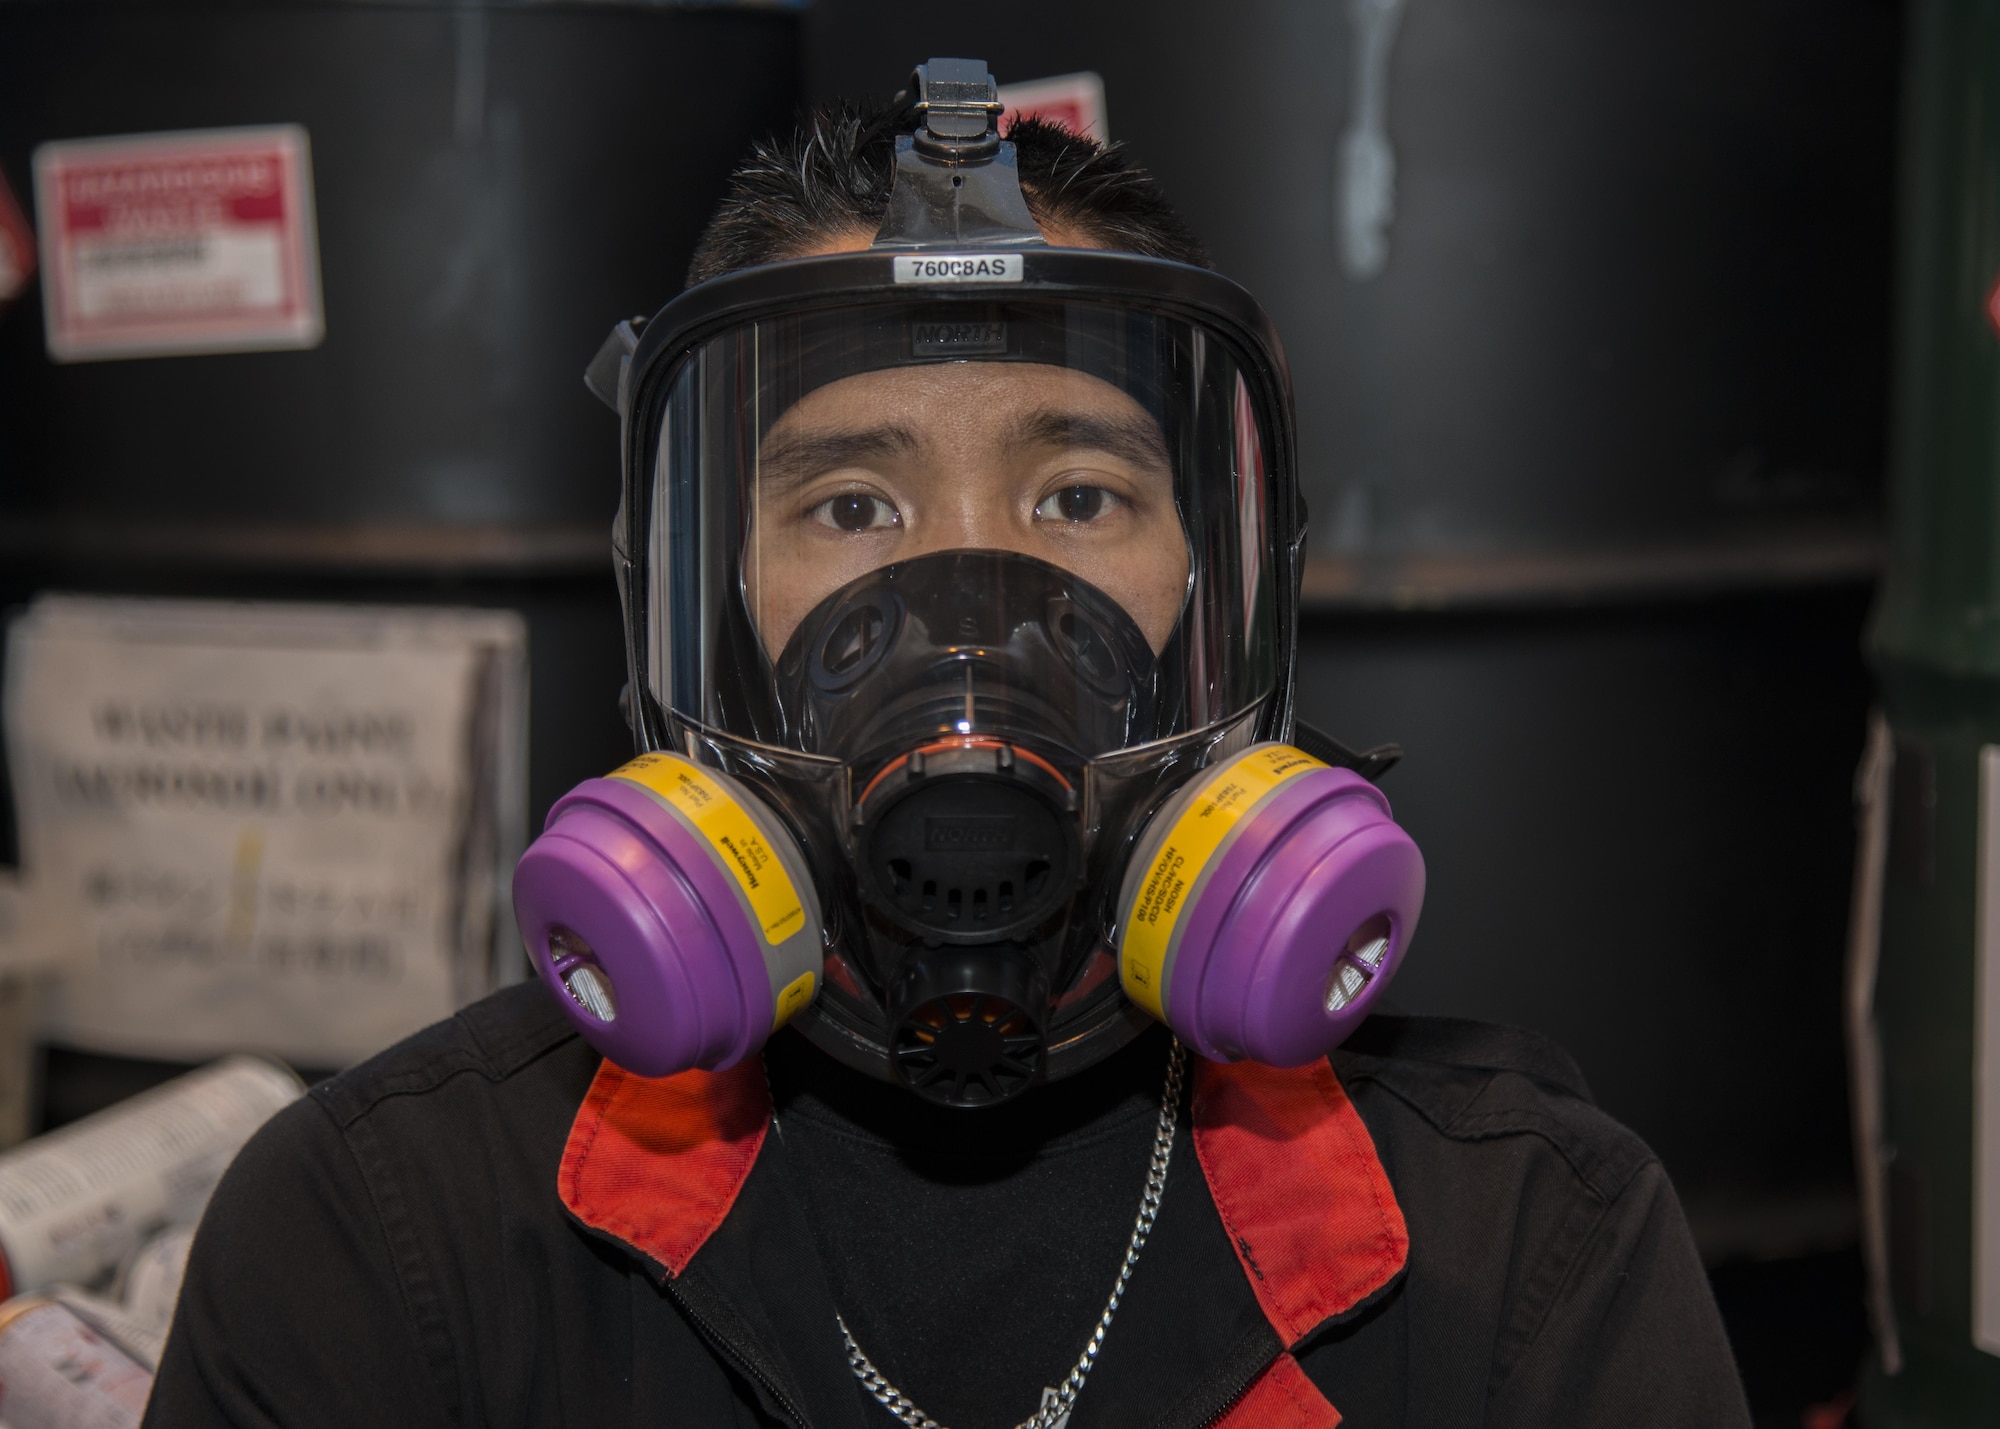 Jay Tababa, a 35th Civil Engineer Squadron hazardous waste storage area operator, poses for a photo at Misawa Air Base, Japan, June 29, 2017. Tababa is the only operator for the hazardous material facility. He ensures all material picked up or dropped off is properly disposed of or recycled in accordance with the Japanese Environmental Governing Standards. (U.S. Air Force photo by Senior Airman Brittany A. Chase)